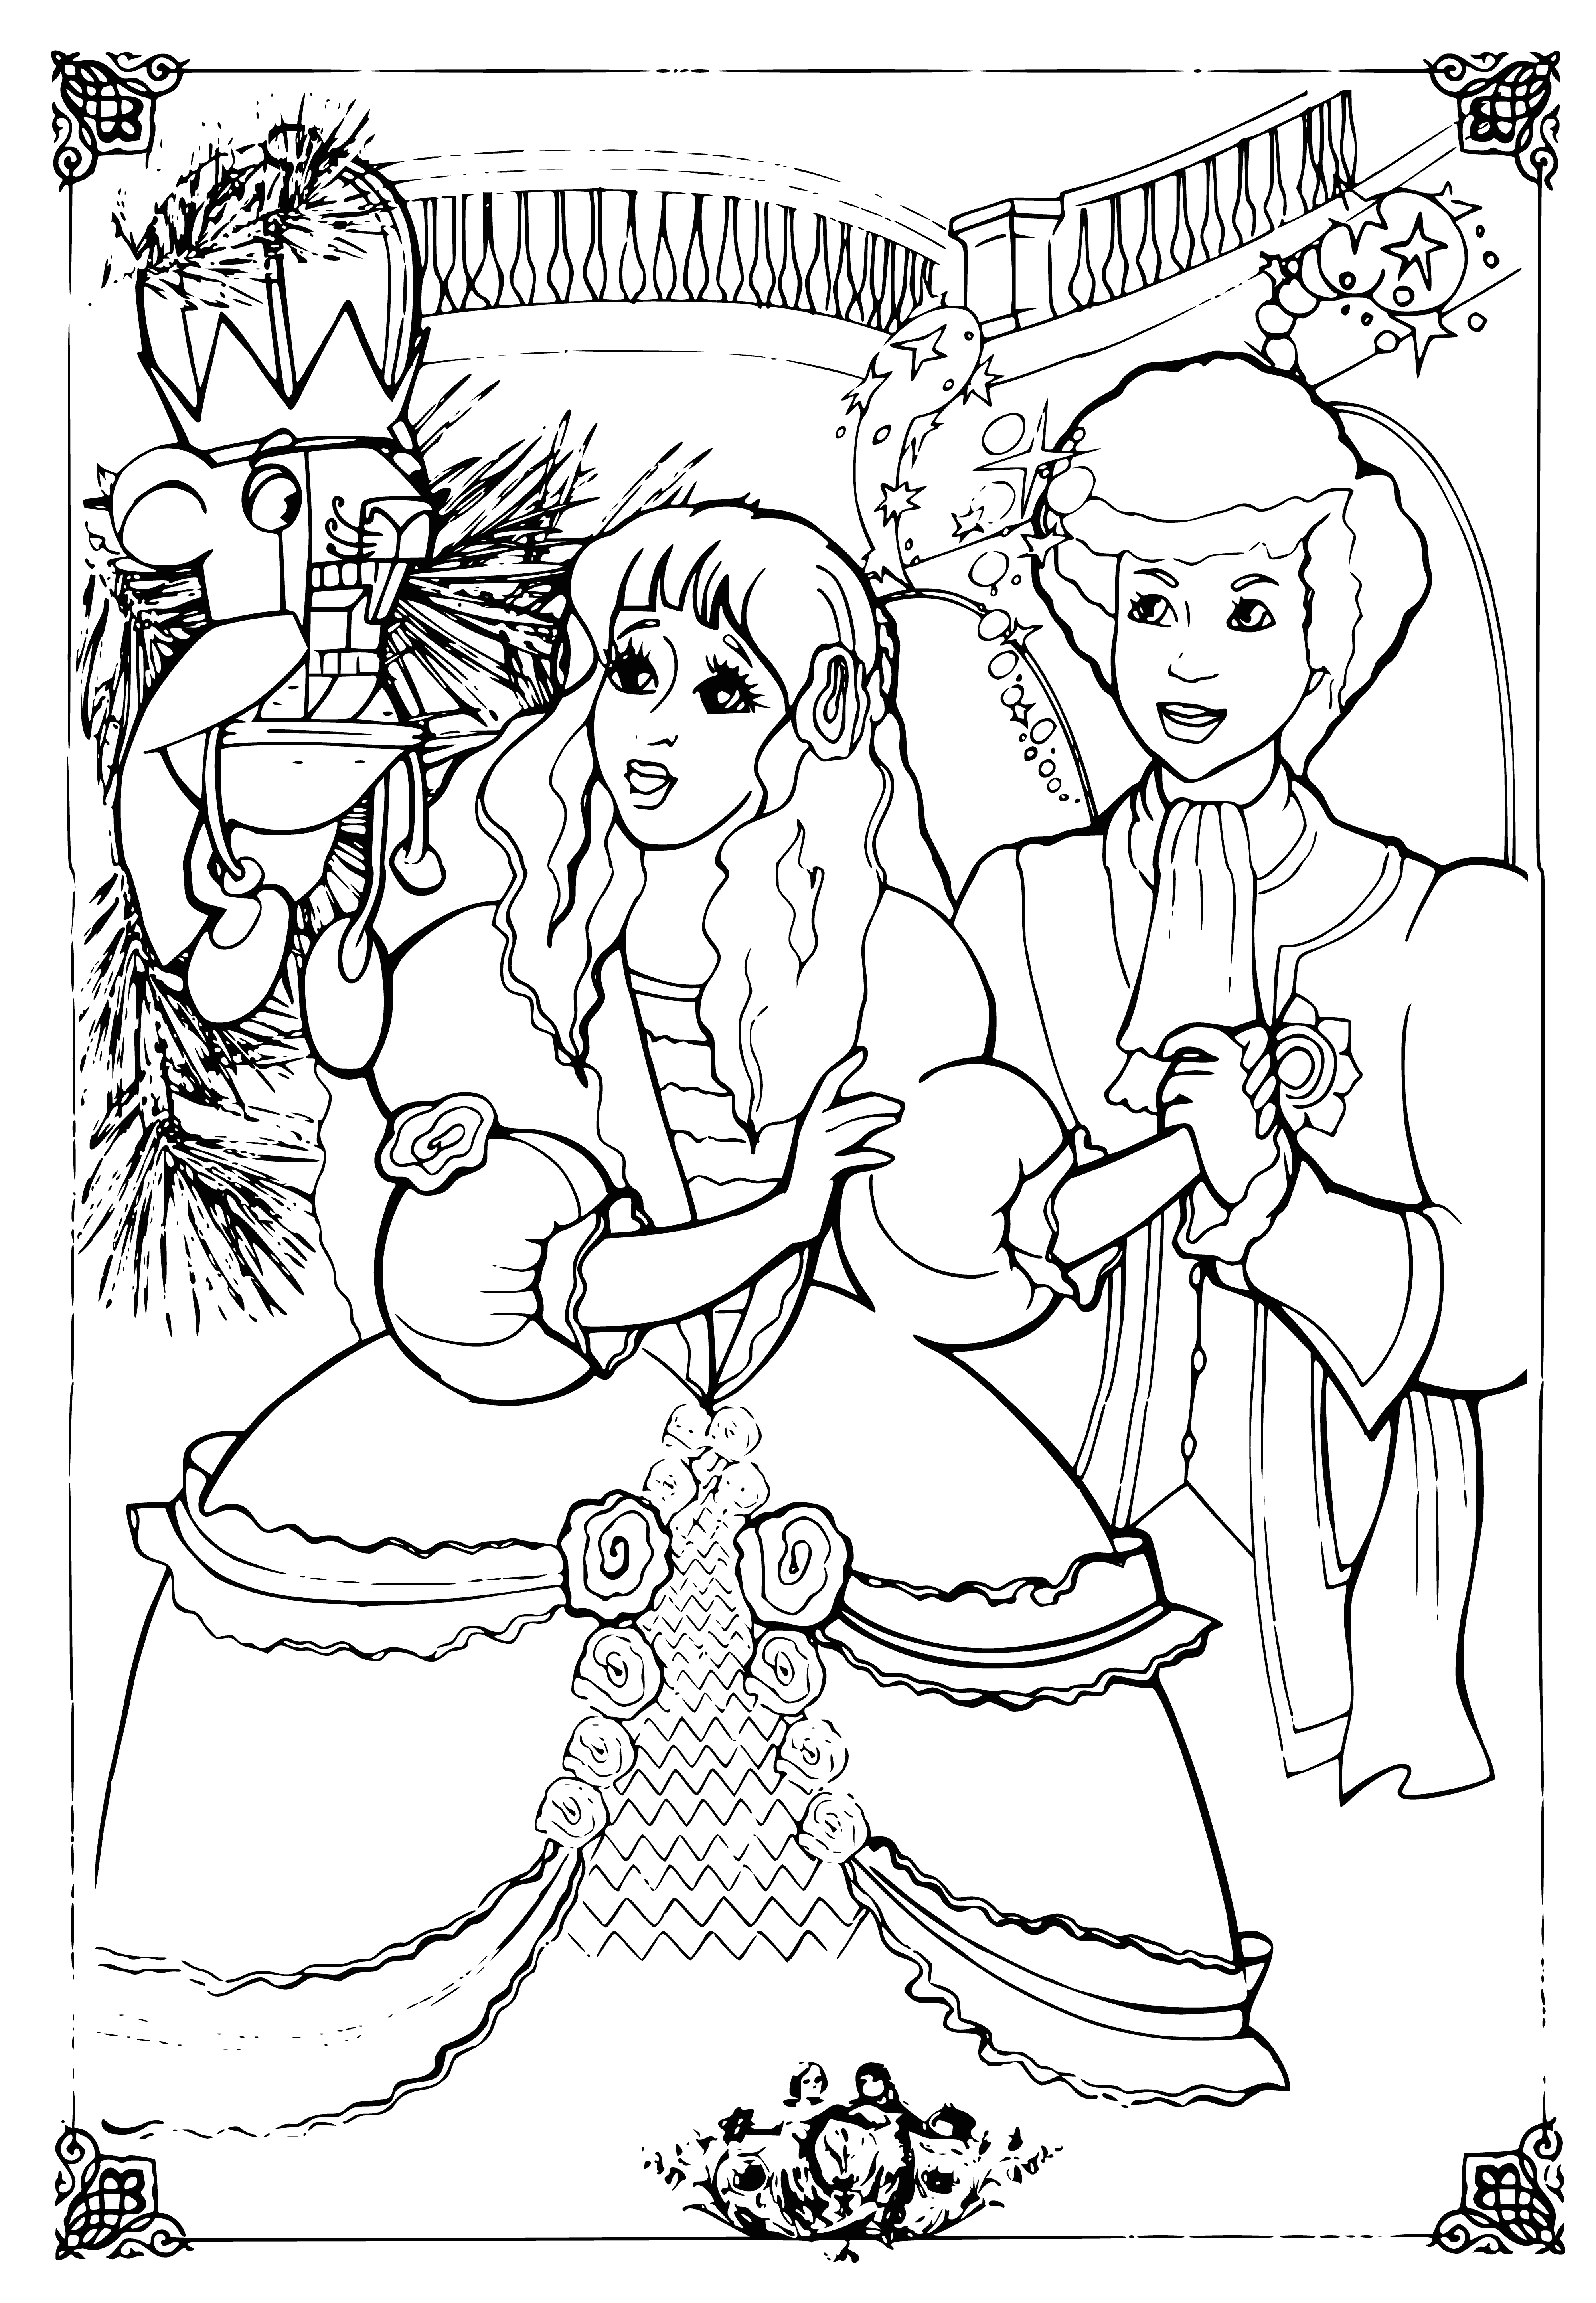 coloring page: Masha & the Prince in traditional Russian clothing in a forest, girl holds nutcracker, boy holds sword & by river. A story of courage & adventure!